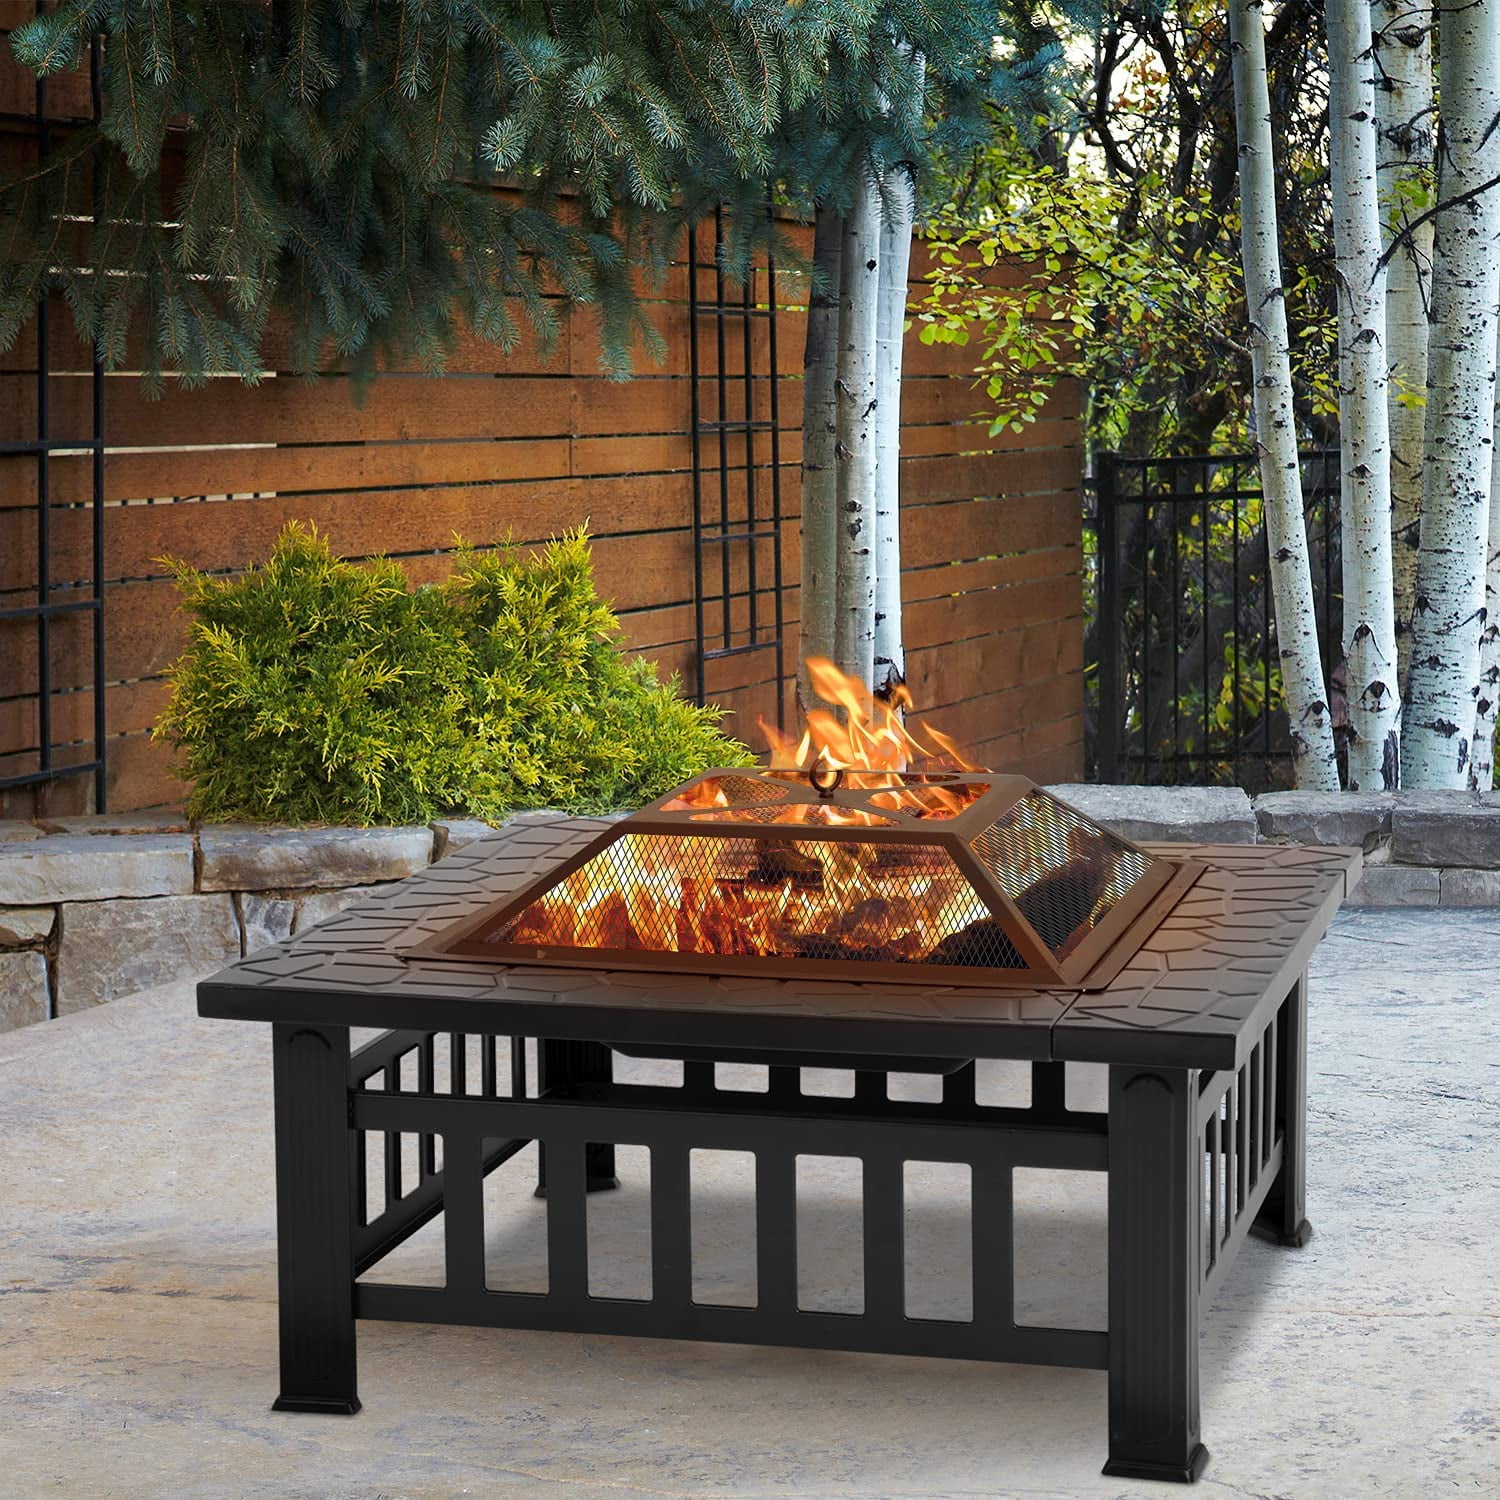 KingSo 32'' Square Fire Pit Table with screen Metal BBQ Grill Pit 